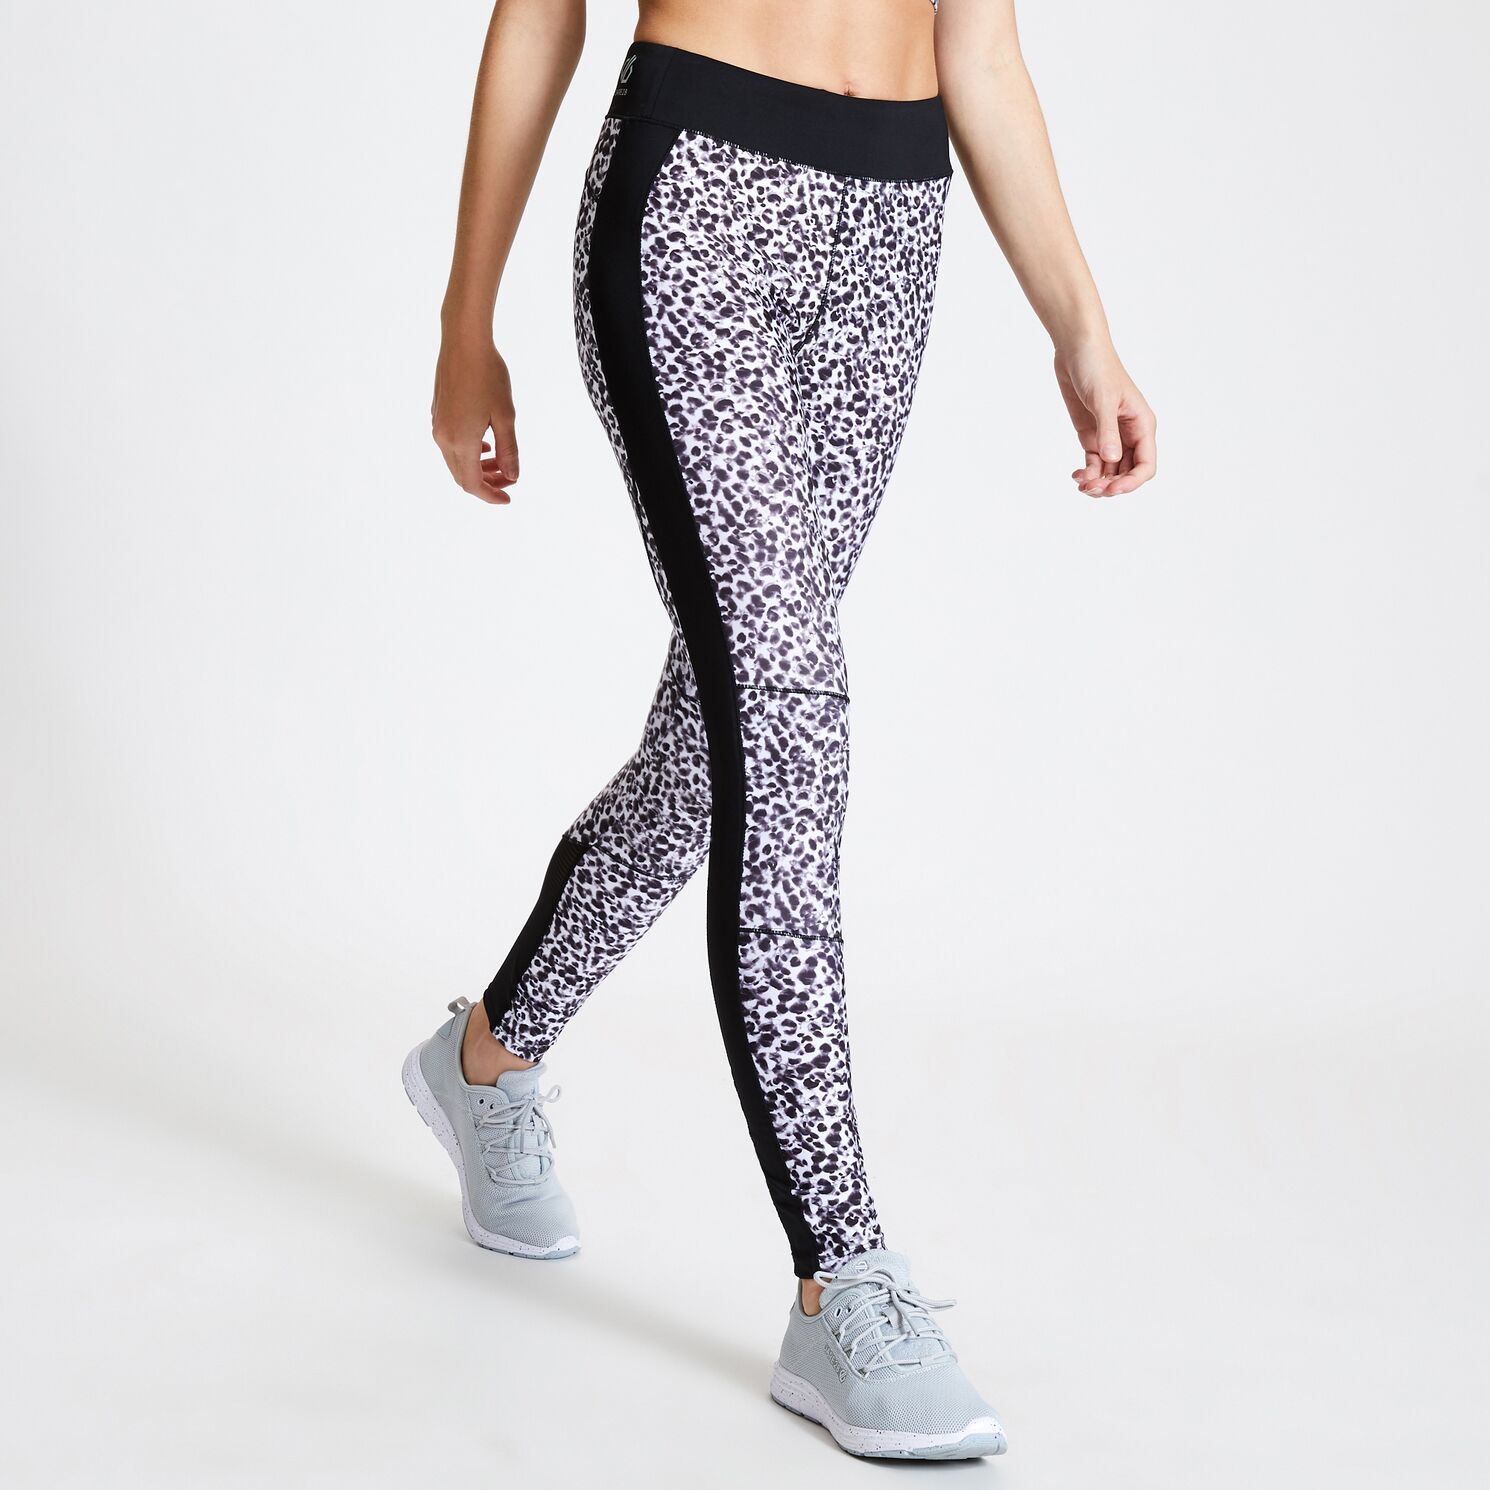 Material: 100% Polyester. Work out leggings made from Q-Wic lightweight fabric. Designed to mould to the body. Quick-drying and high-stretch. Flat locked seams and deep elasticated waistband for comfort.